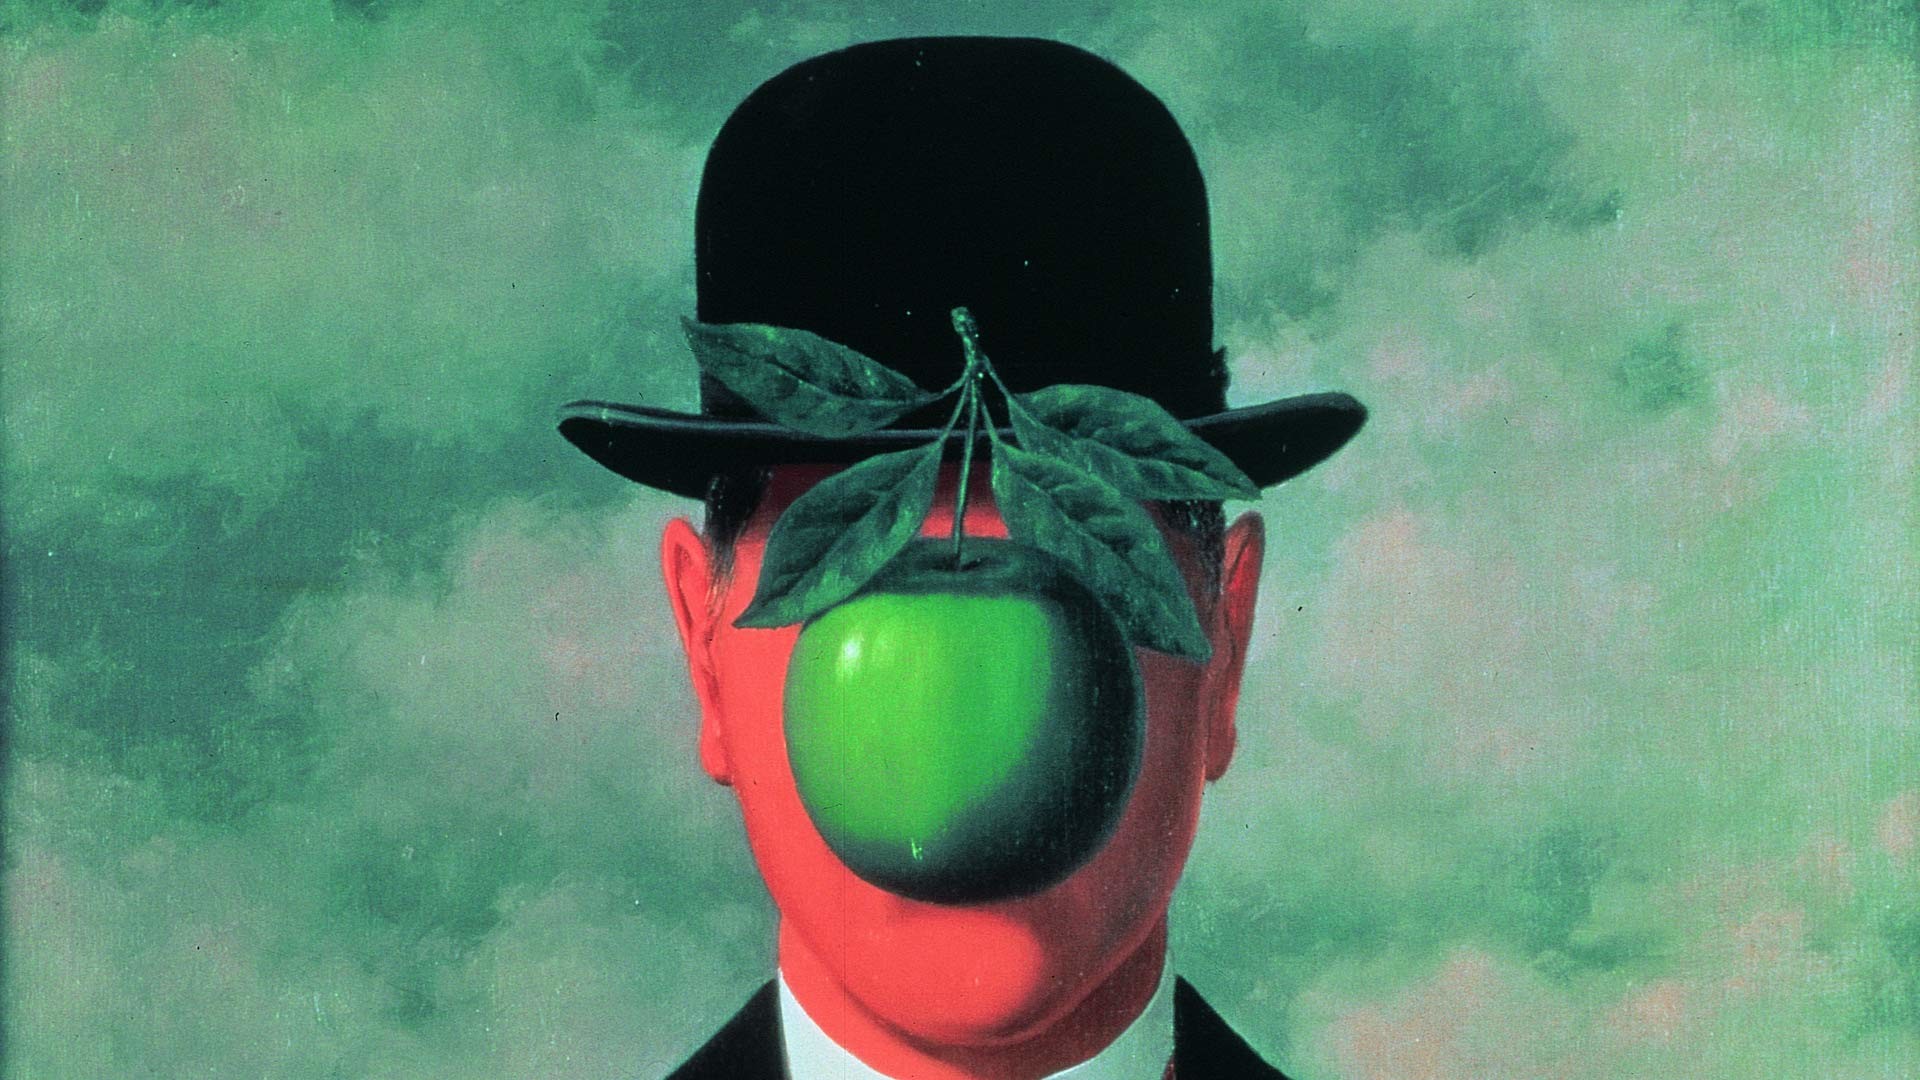 1920x1080 PERVADED BY THE SPIRIT OF MAGRITTE"